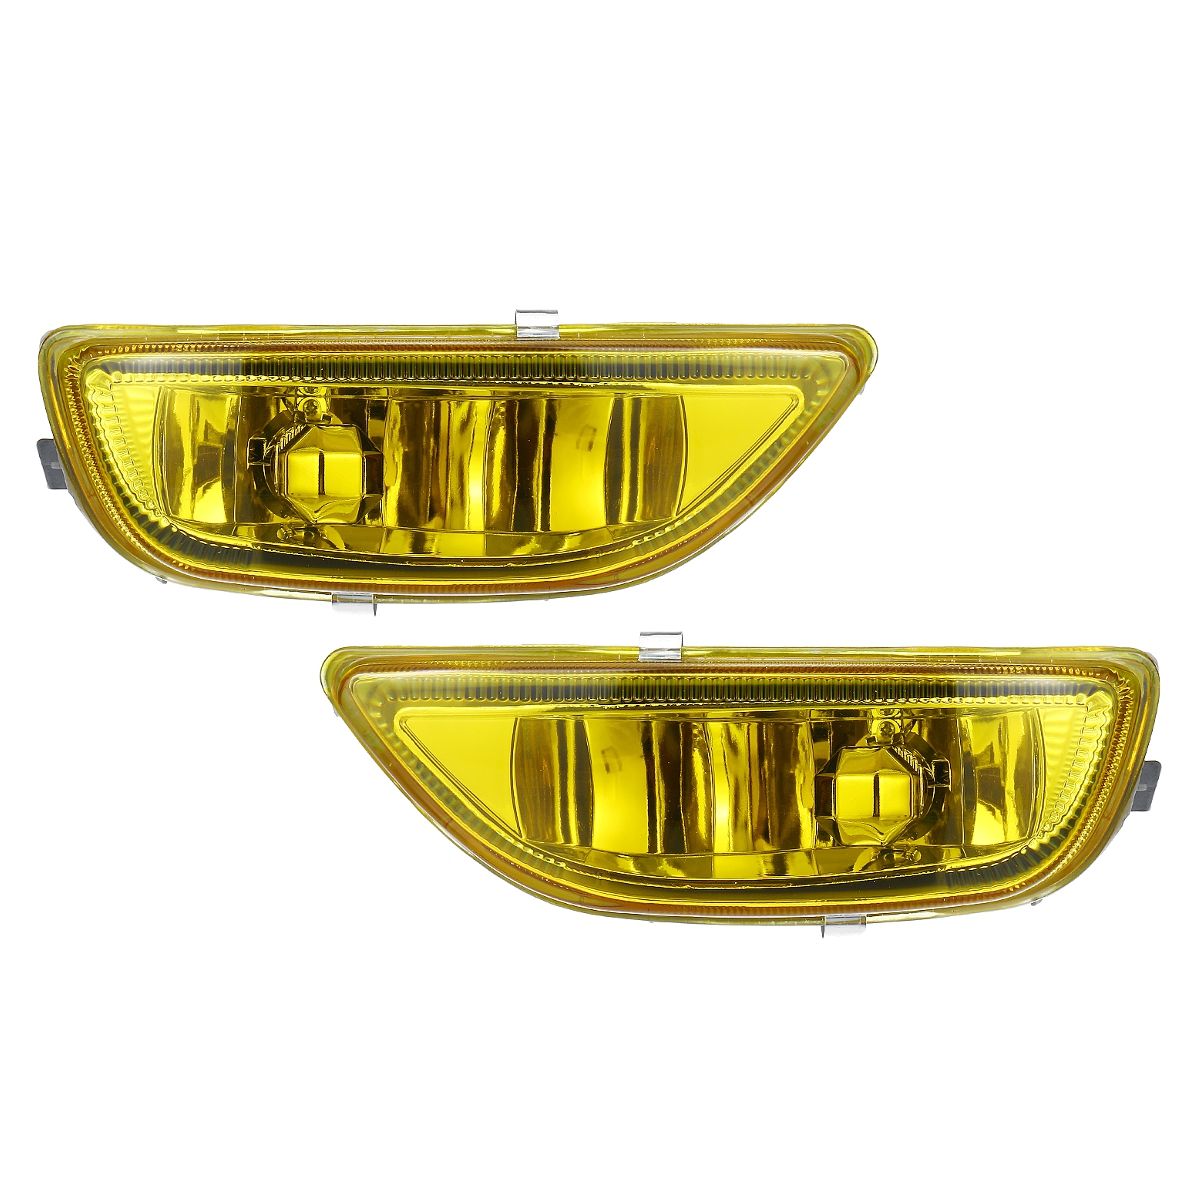 12V-Car-Front-Bumper-Fog-Lights-Yellow-Driving-Lamp-for-Toyota-Corolla-2001-2002-1423932